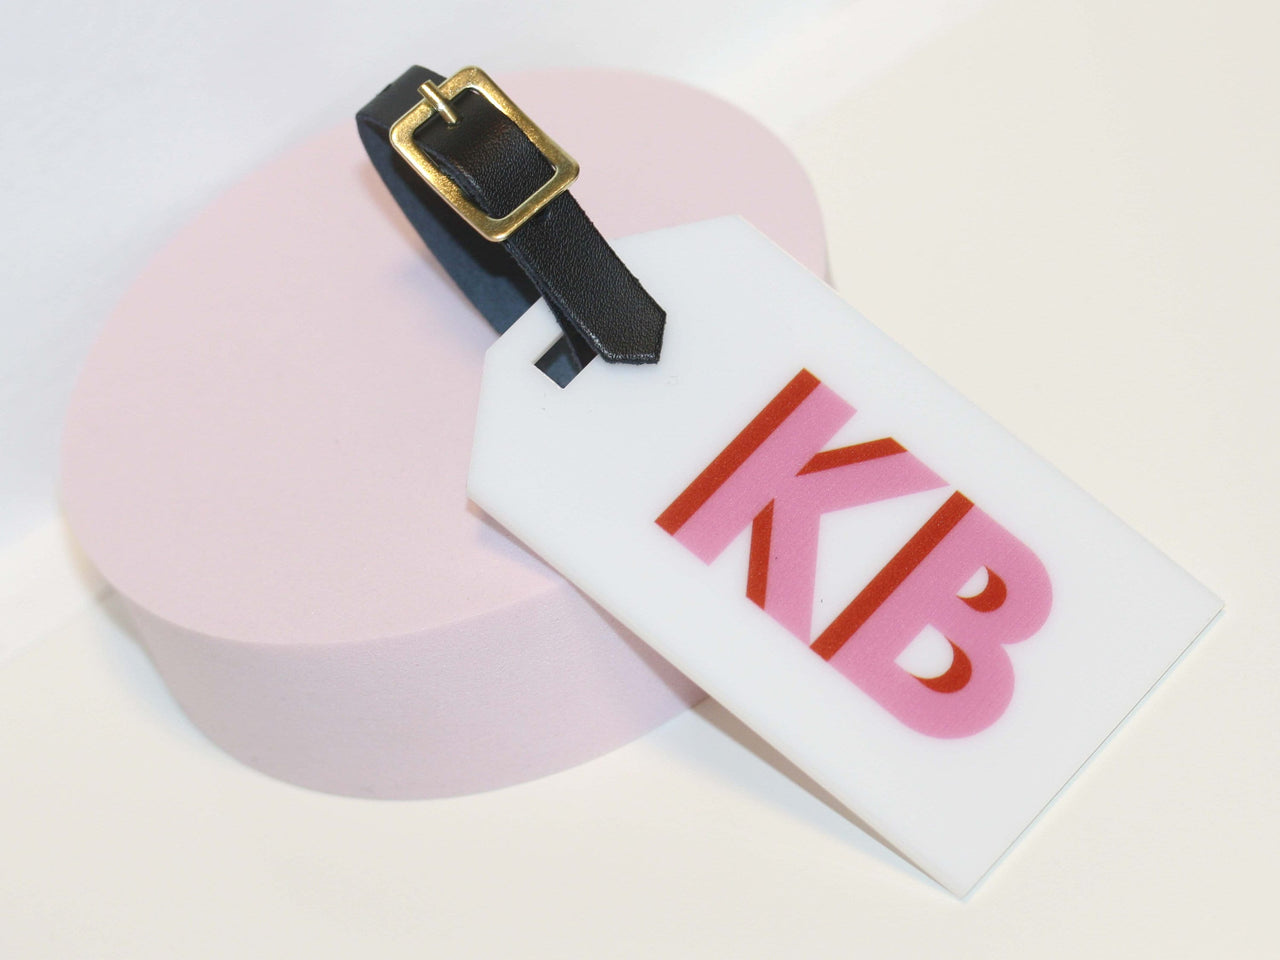 Personalized Luggage Tag – The Native Bride